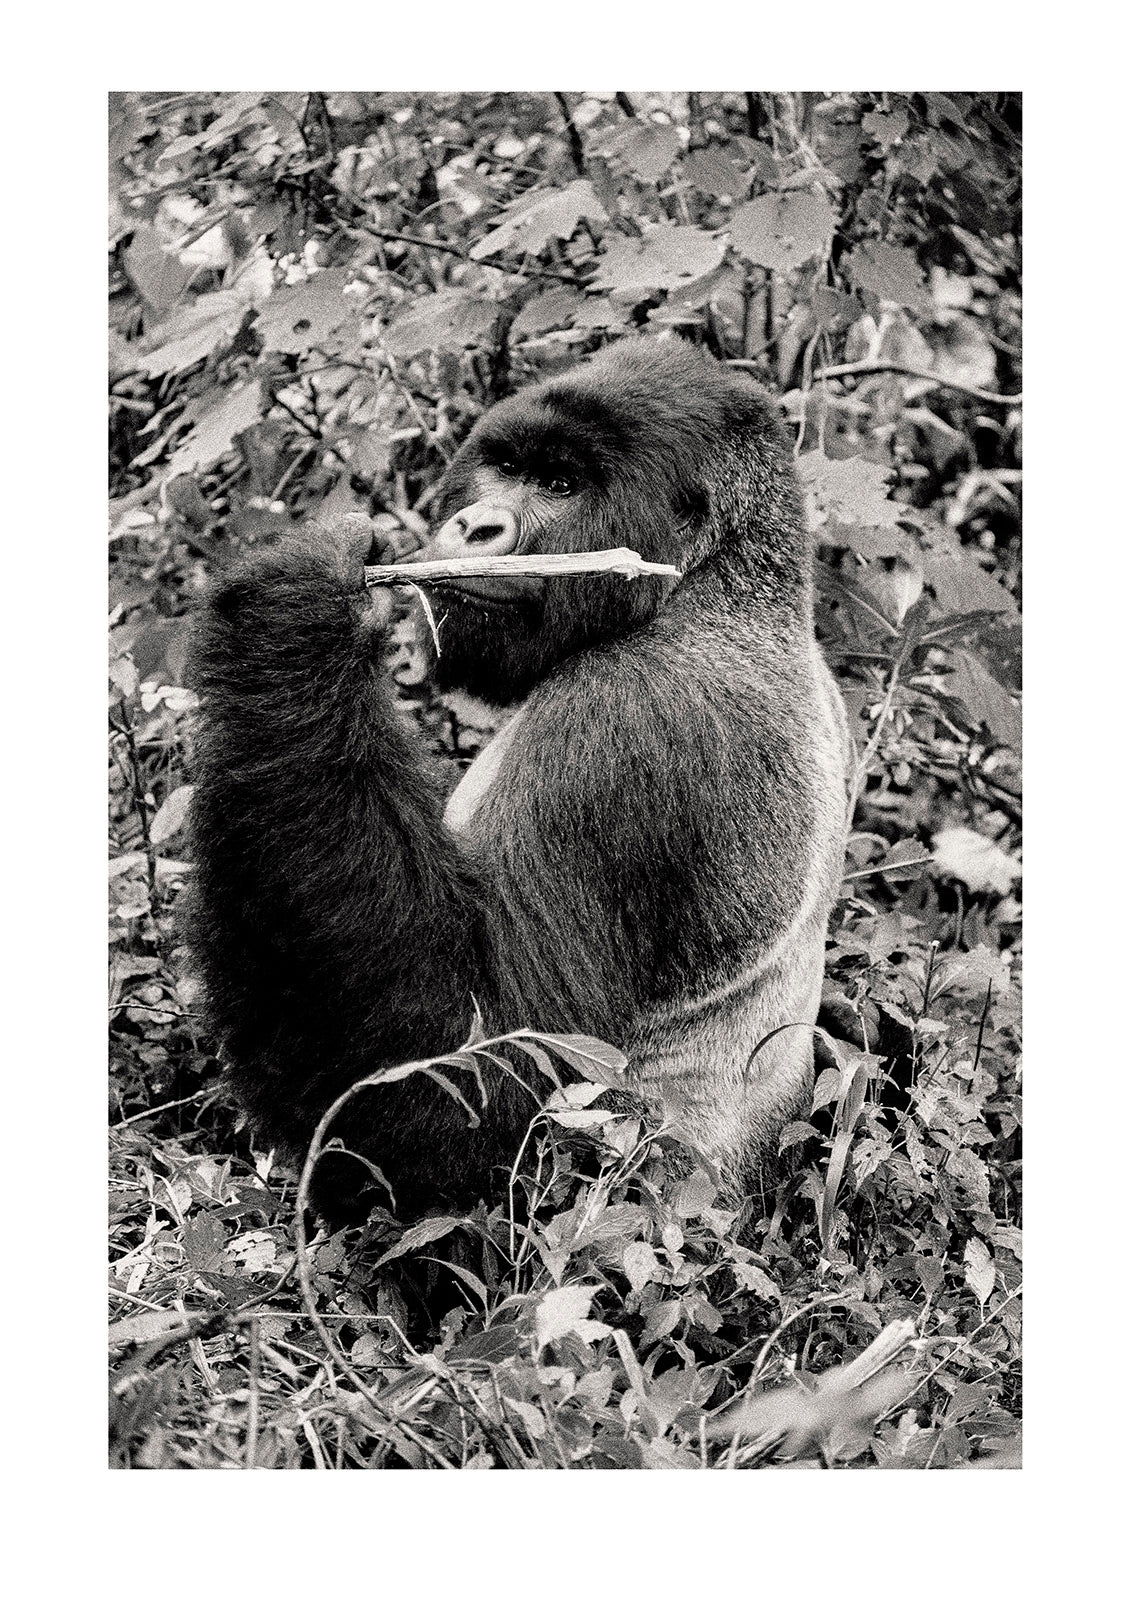 A large male silverback Mountain Gorilla feeding in an equatorial rainforest. Captured on Ilford HP5 black and white negative film. Republic of Zaire. Now recogised as the Democratic Republic of the Congo.